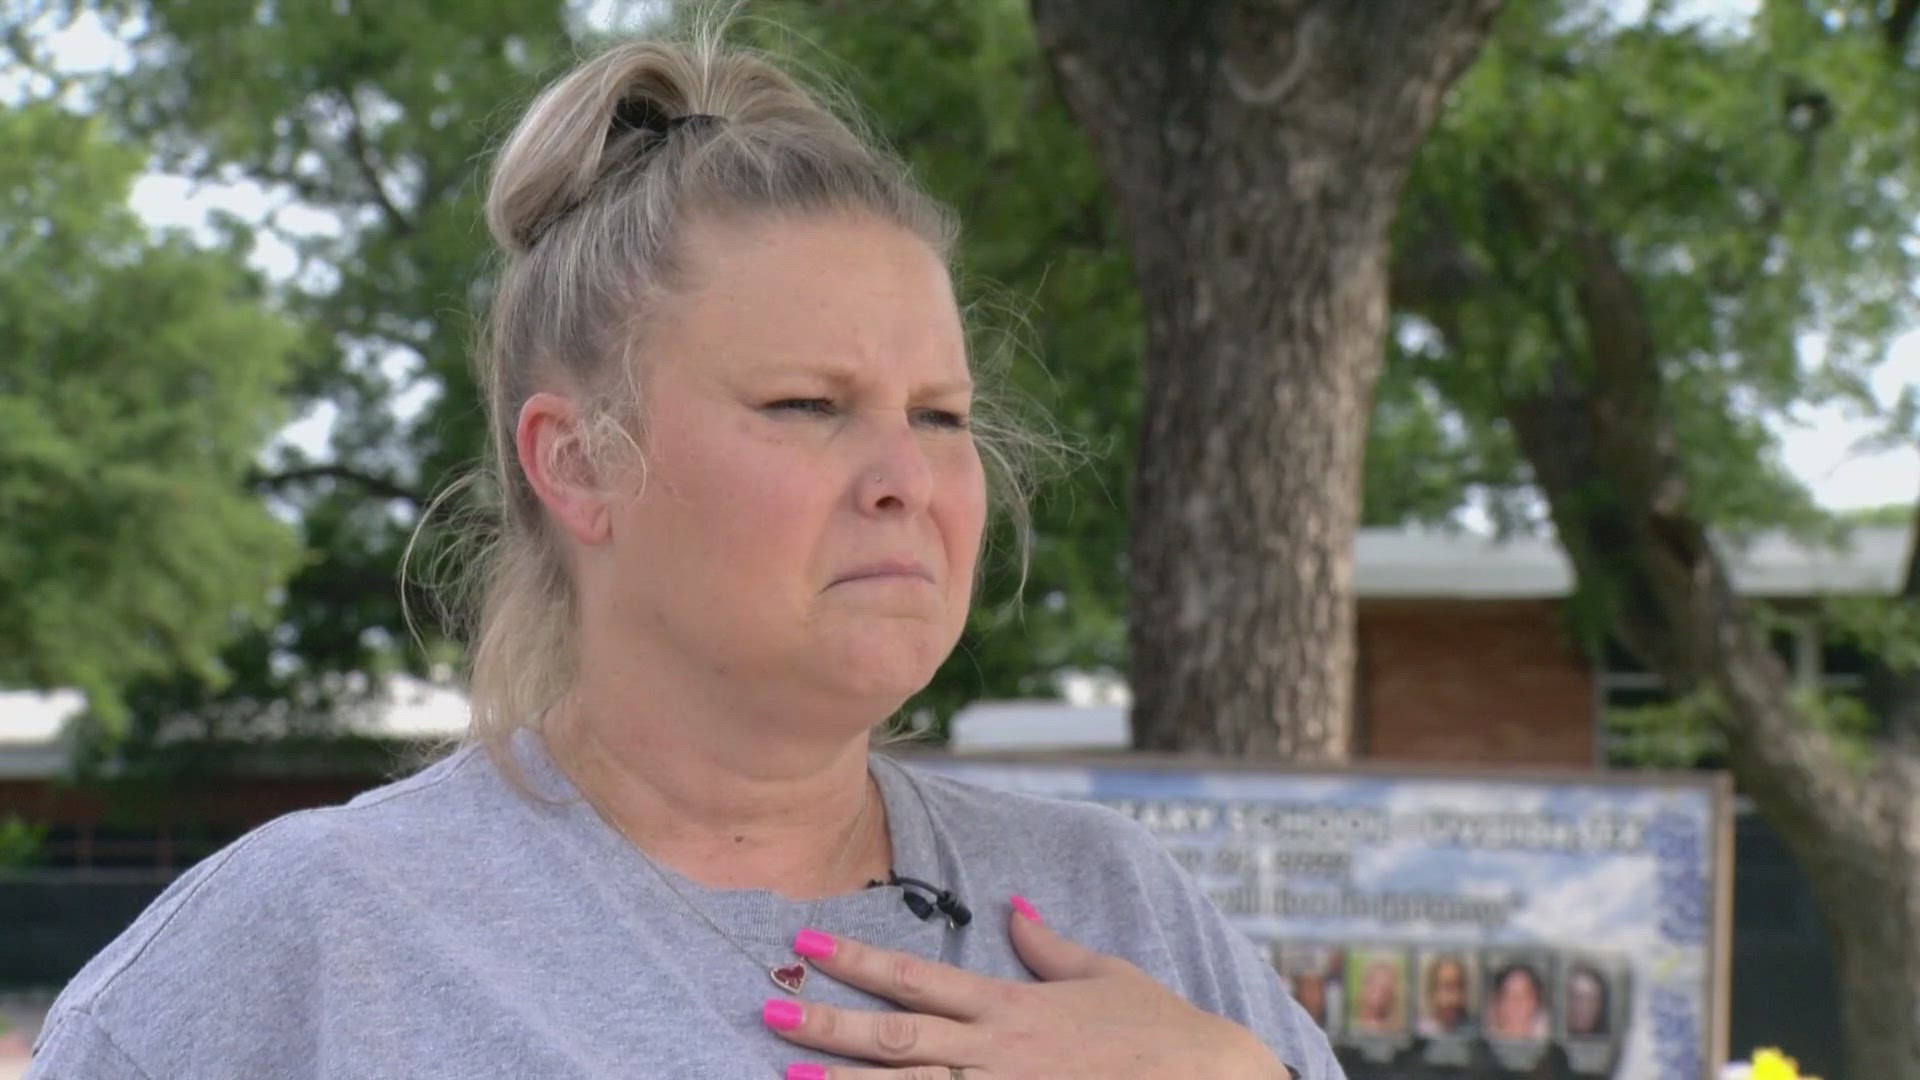 Nicole Ogburn made eye contact with the gunman who killed 21 beloved members of her Robb Elementary family. She explains why year two was tougher than the first.